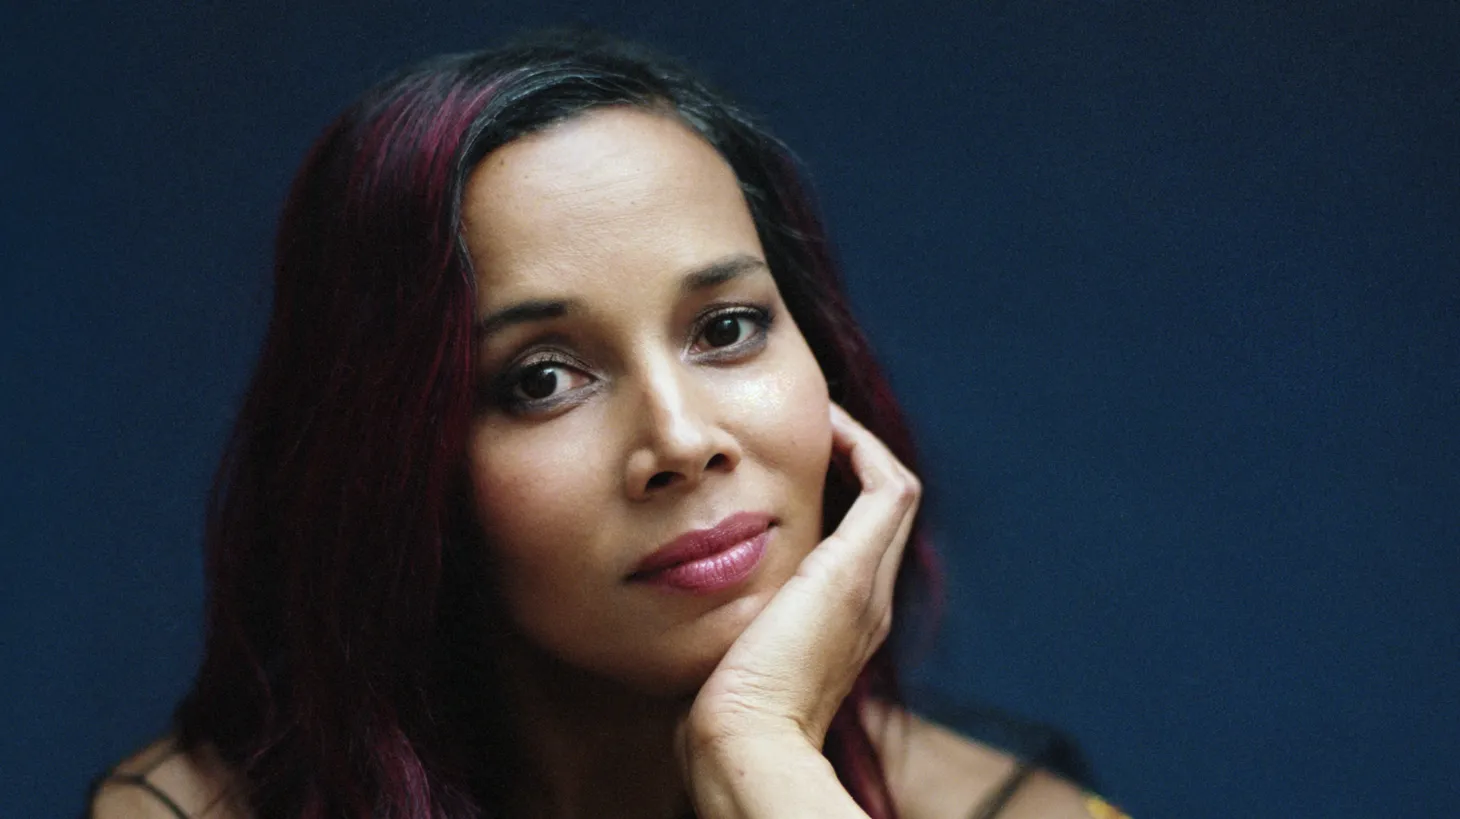 MacArthur Prize-winning singer, composer, and instrumentalist Rhiannon Giddens recently added a 2023 Pulitzer to her list of accolades for the opera Omar. Here, she struts her stuff on the Zydeco-funk jam “You Louisiana Man.”